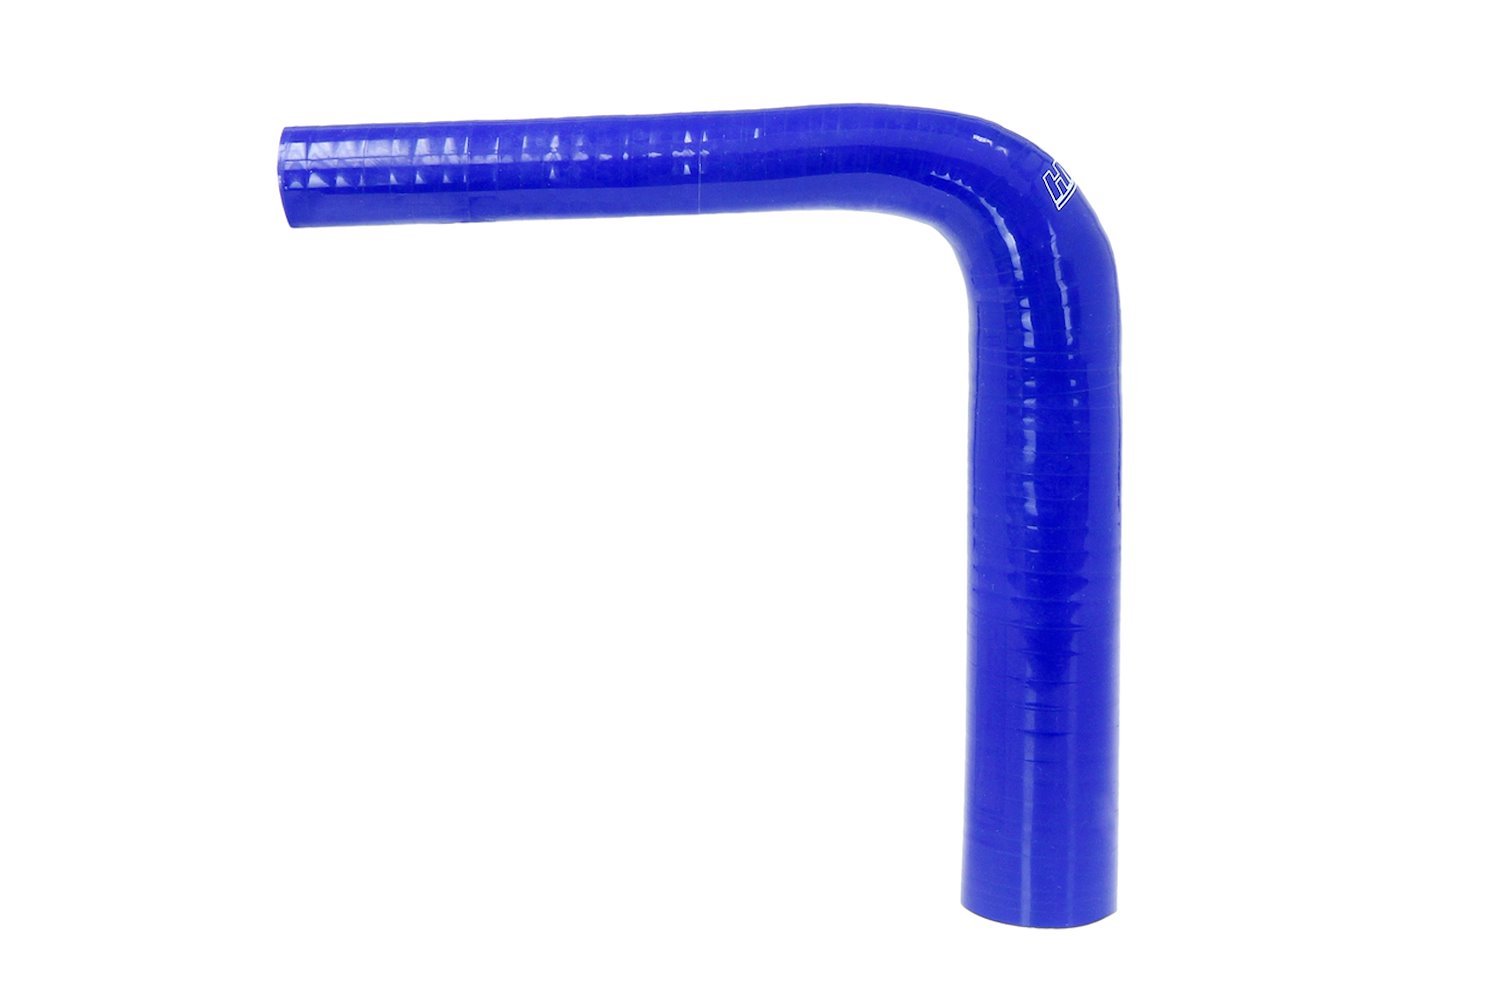 HTSER90-125-150-BLUE Silicone 90-Degree Elbow Hose, High-Temp 4-Ply Reinforced, 1-1/4 in. - 1-1/2 in. ID, Blue